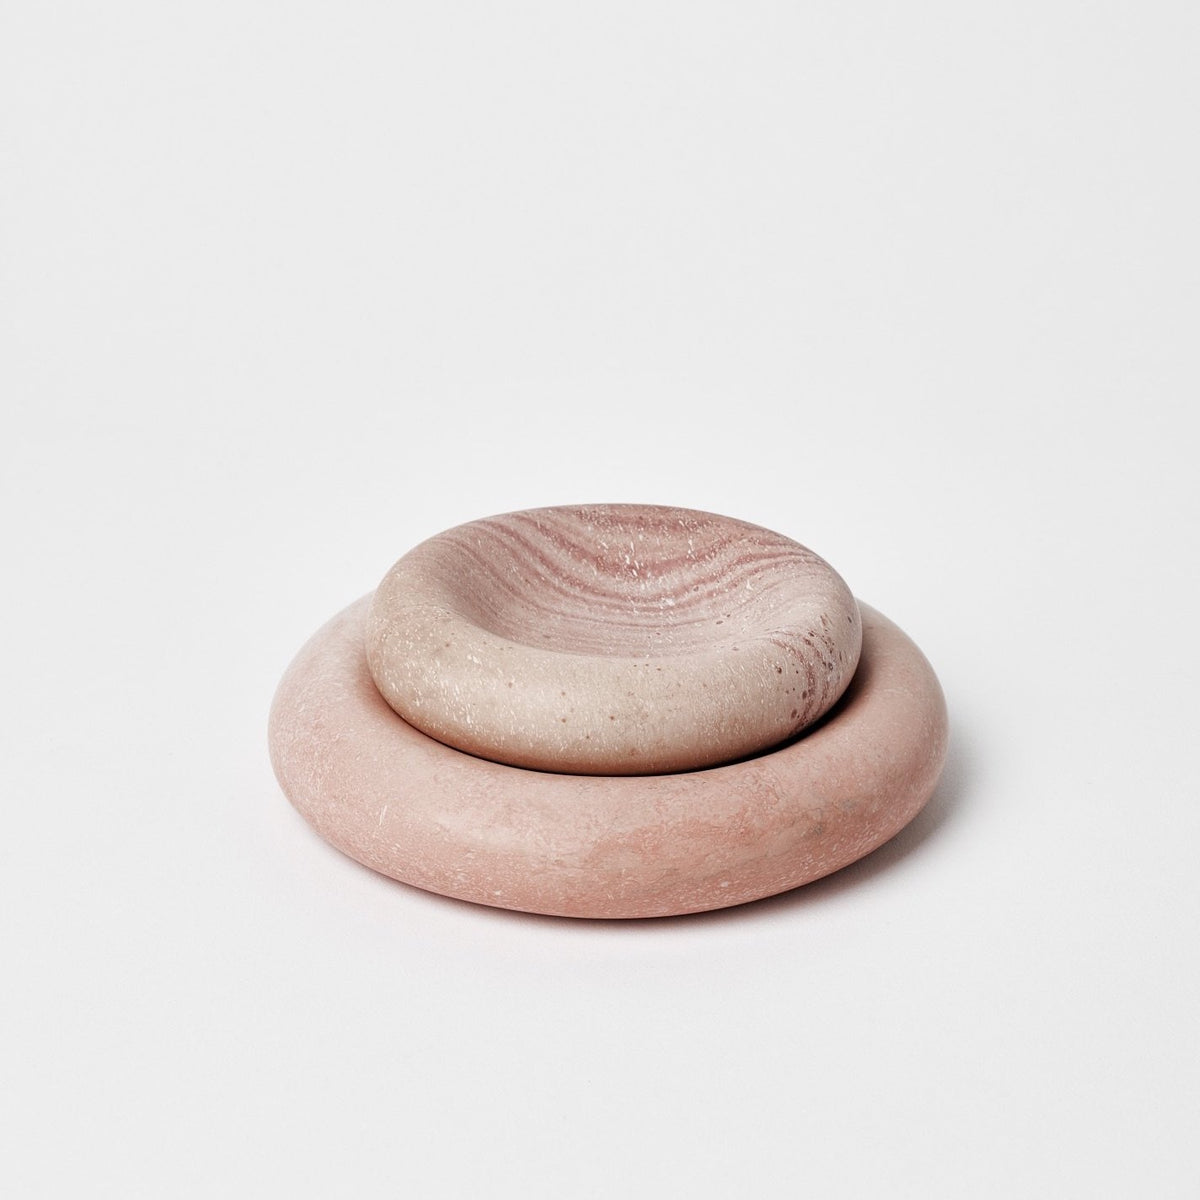 A pair of Asili Stacker Round Tray – Pink bowls stacked on top of each other.